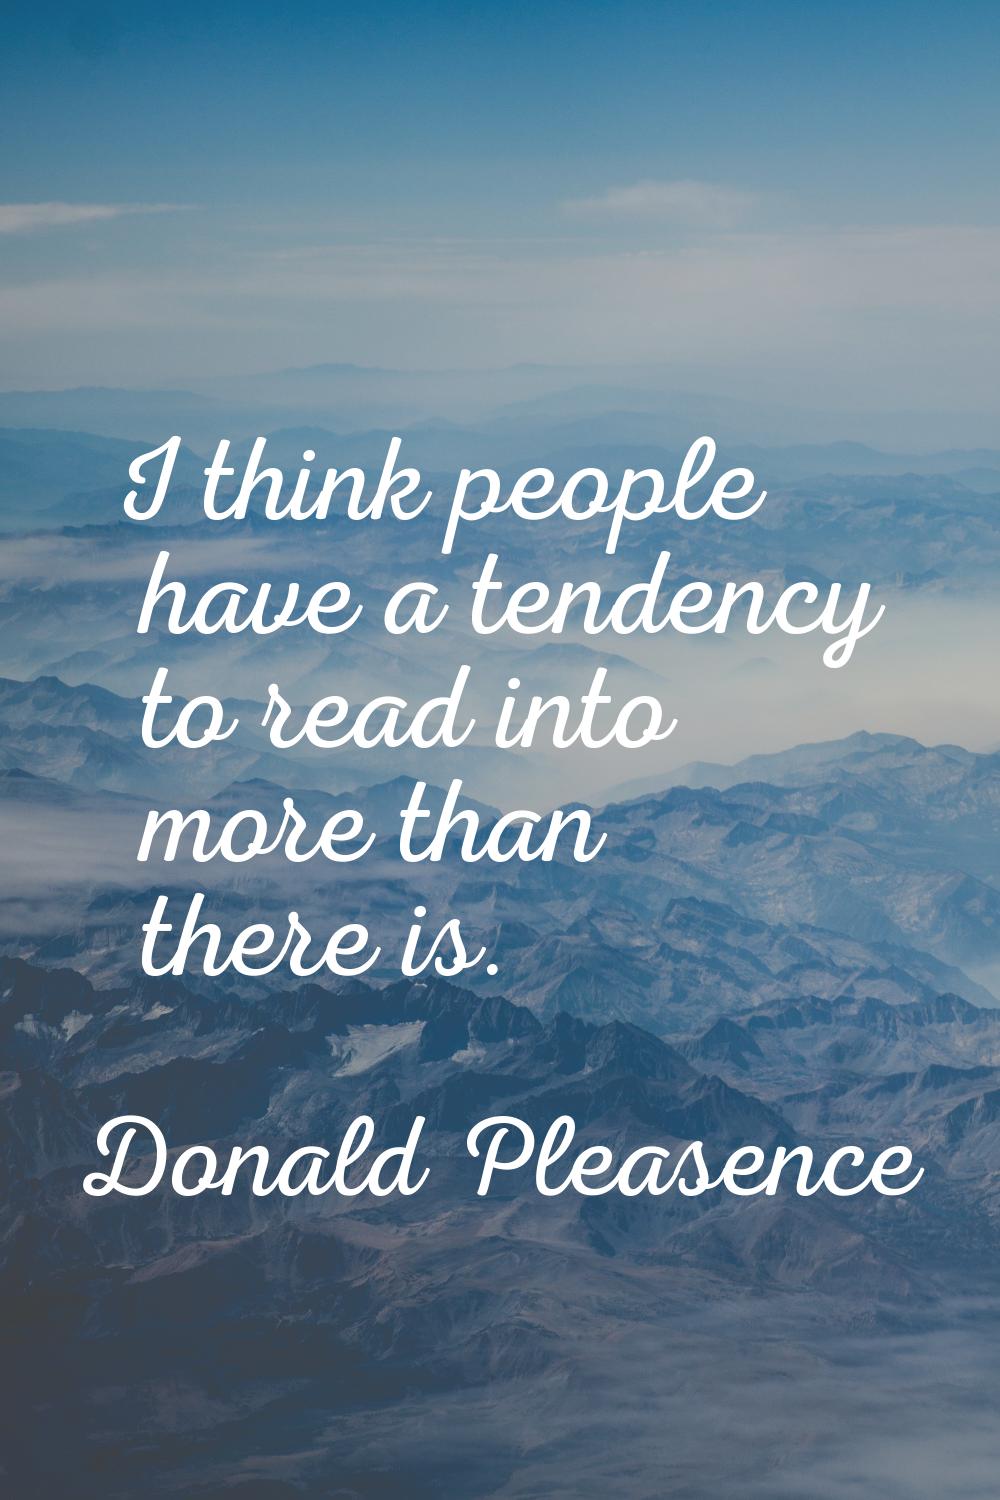 I think people have a tendency to read into more than there is.